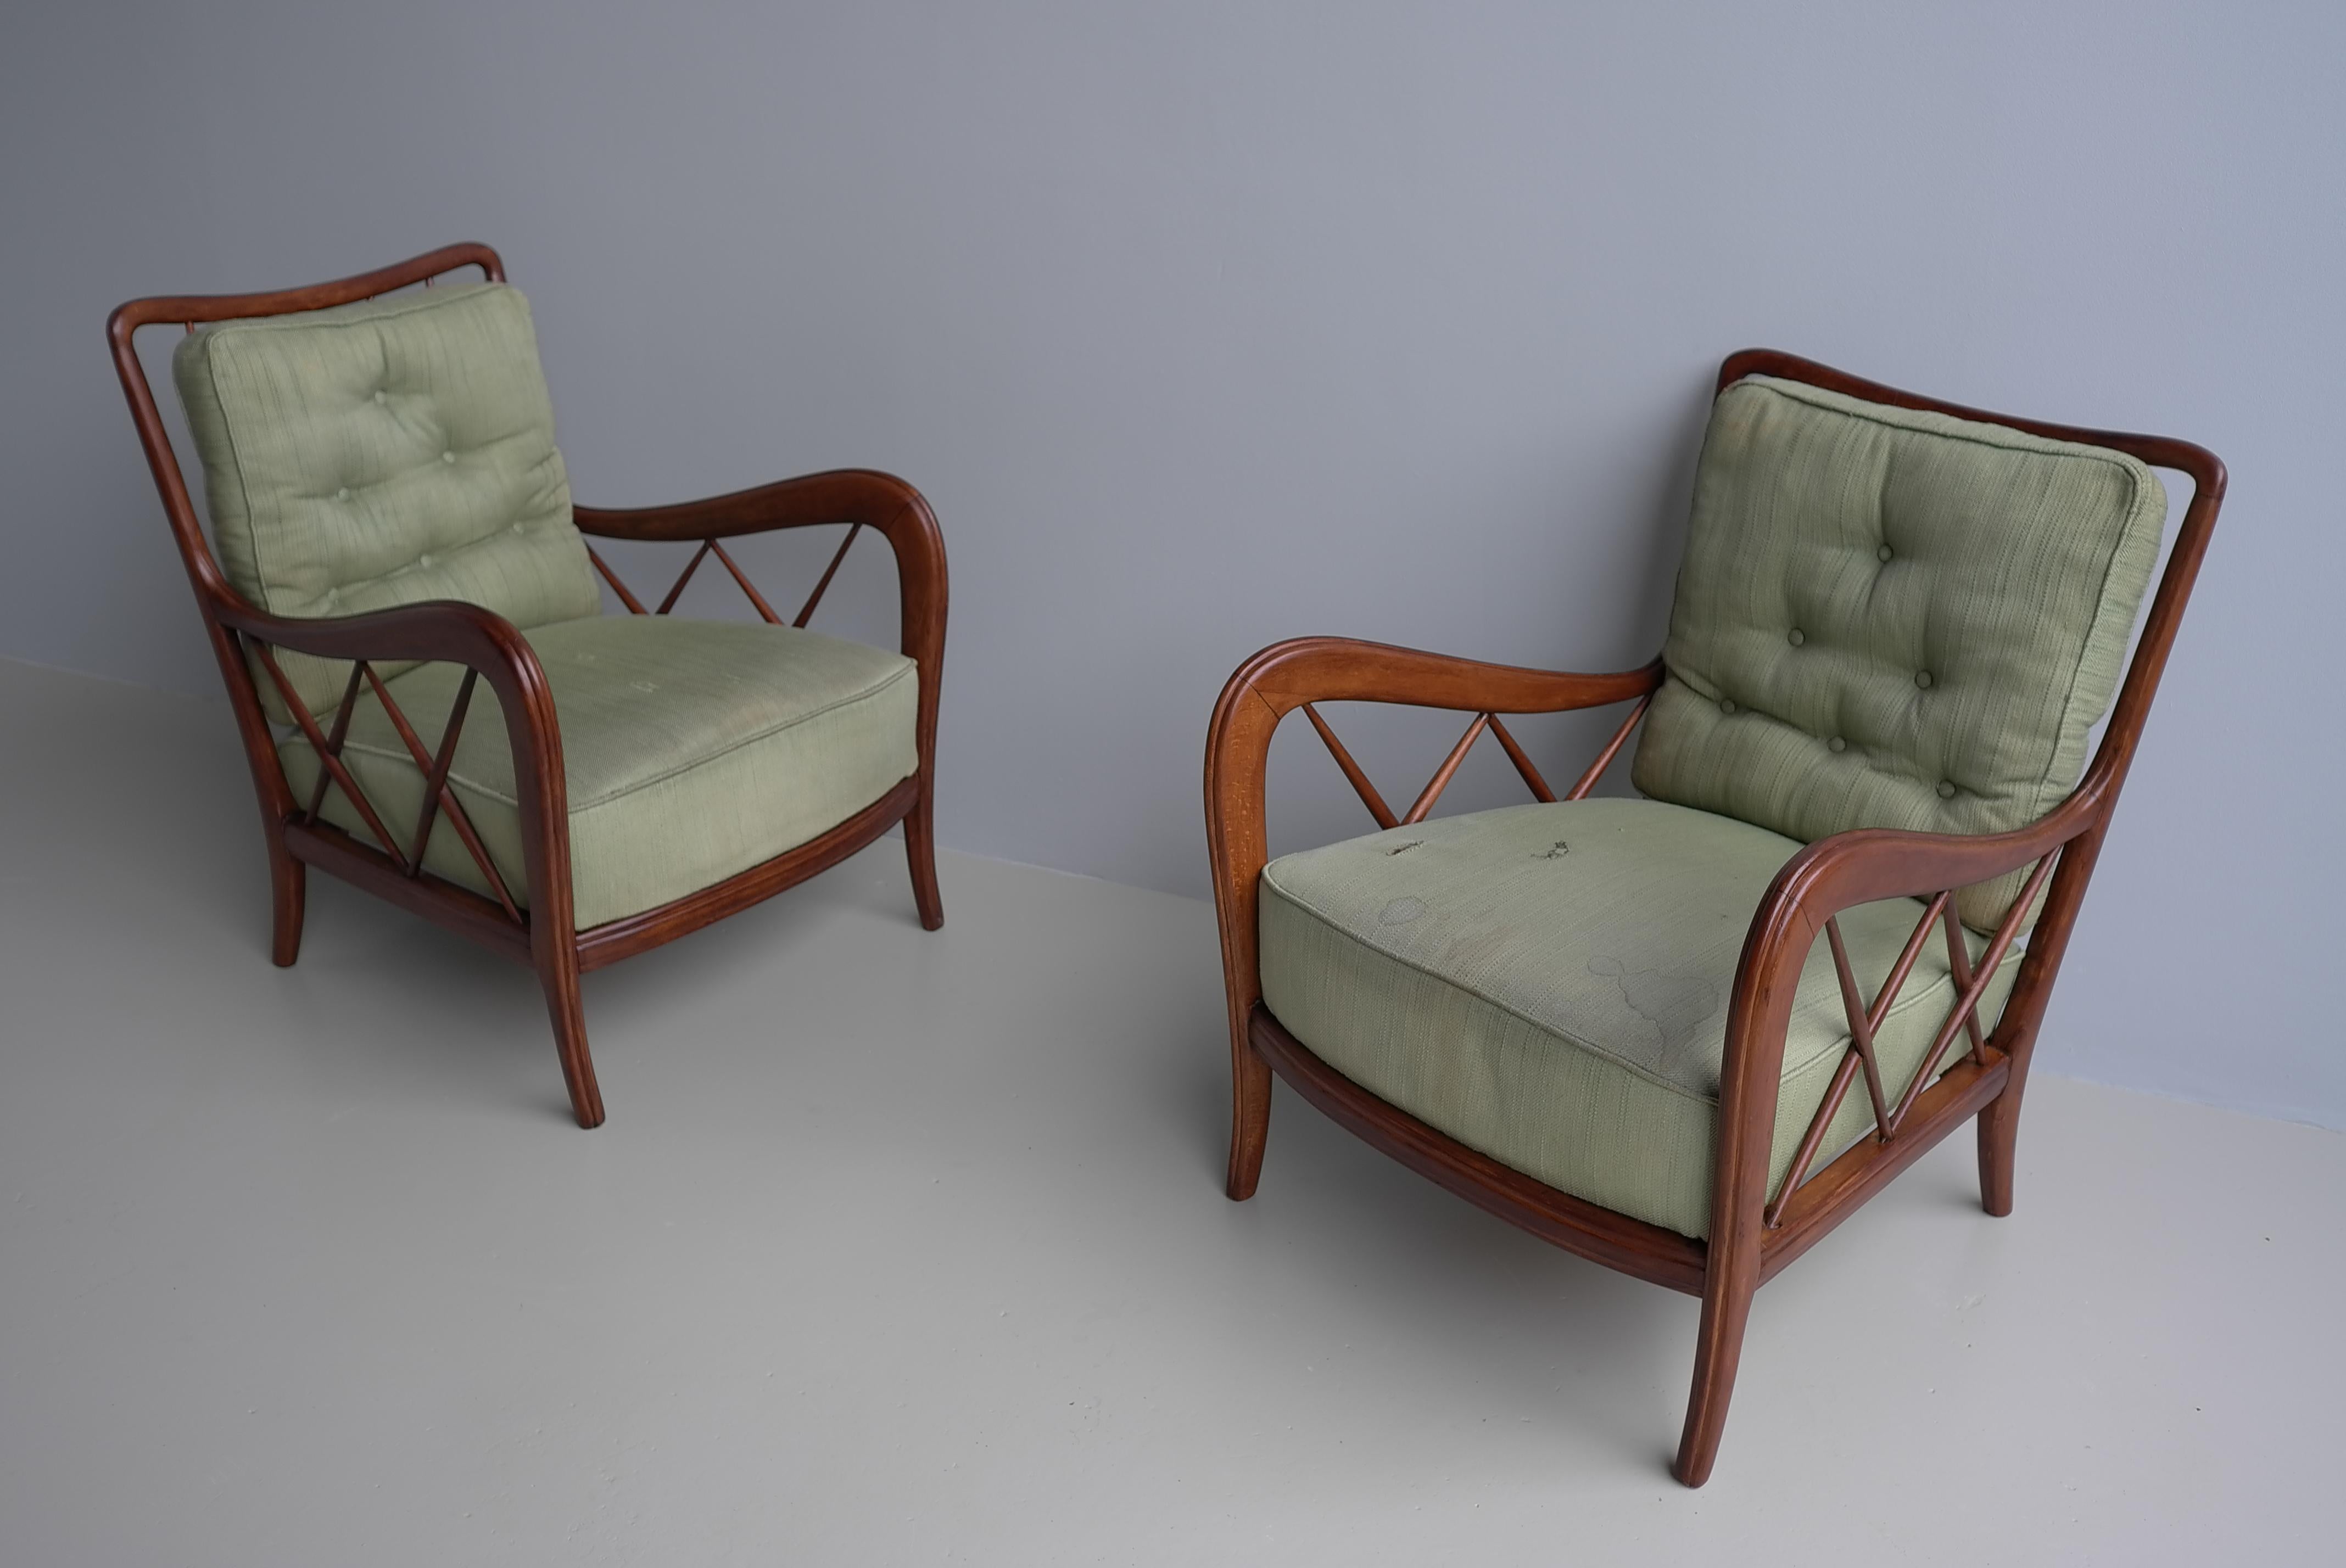 Walnut Wooden Lounge Chairs attr Paolo Buffa, Milan Italy 1940's For Sale 12